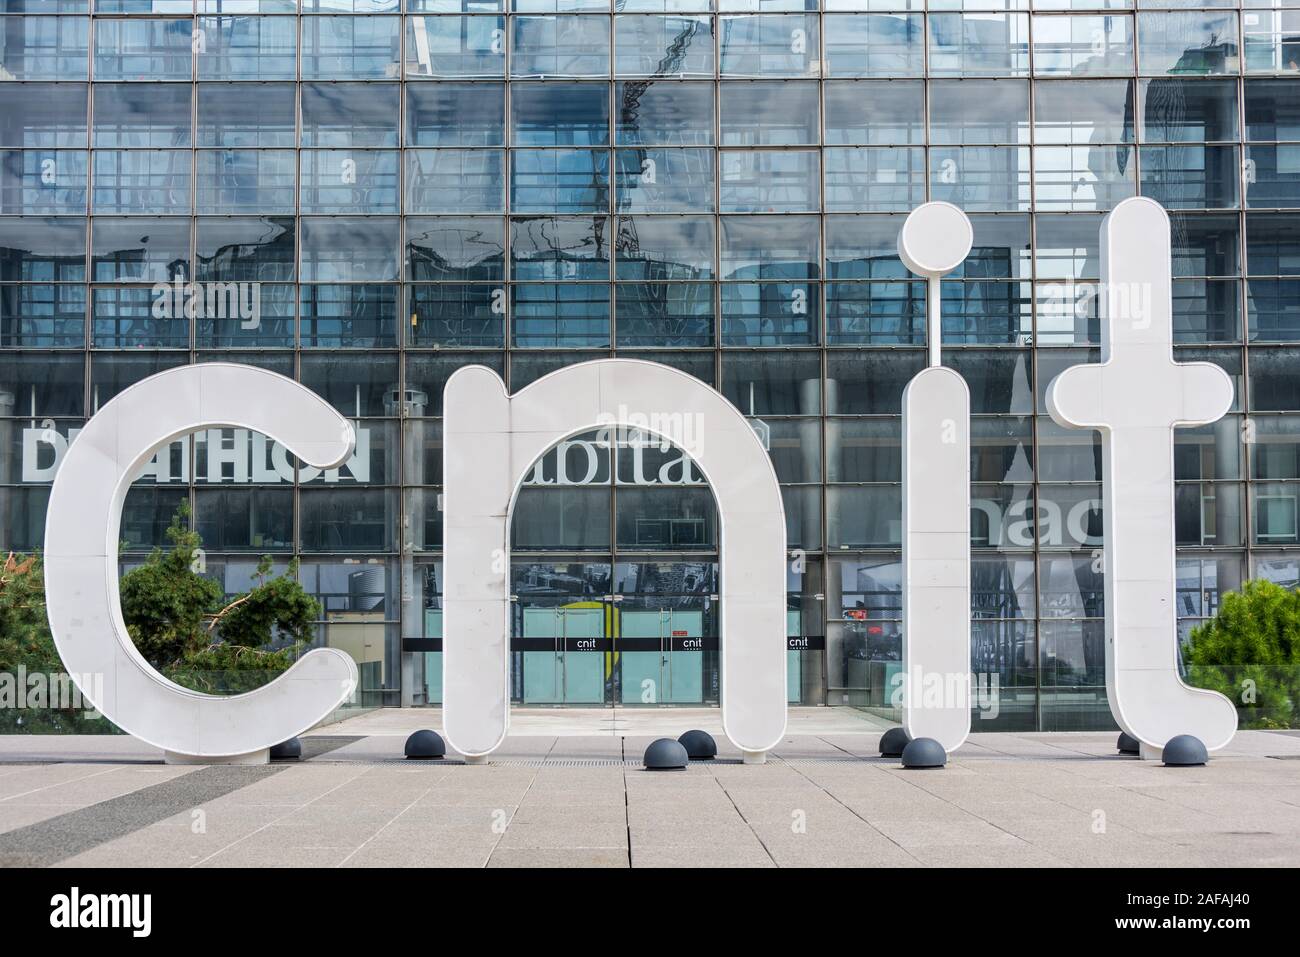 The CNIT (Centre for New Industries and Technologies), an interesting concrete and glass construction with a very unusual shape in La Defense, a major Stock Photo